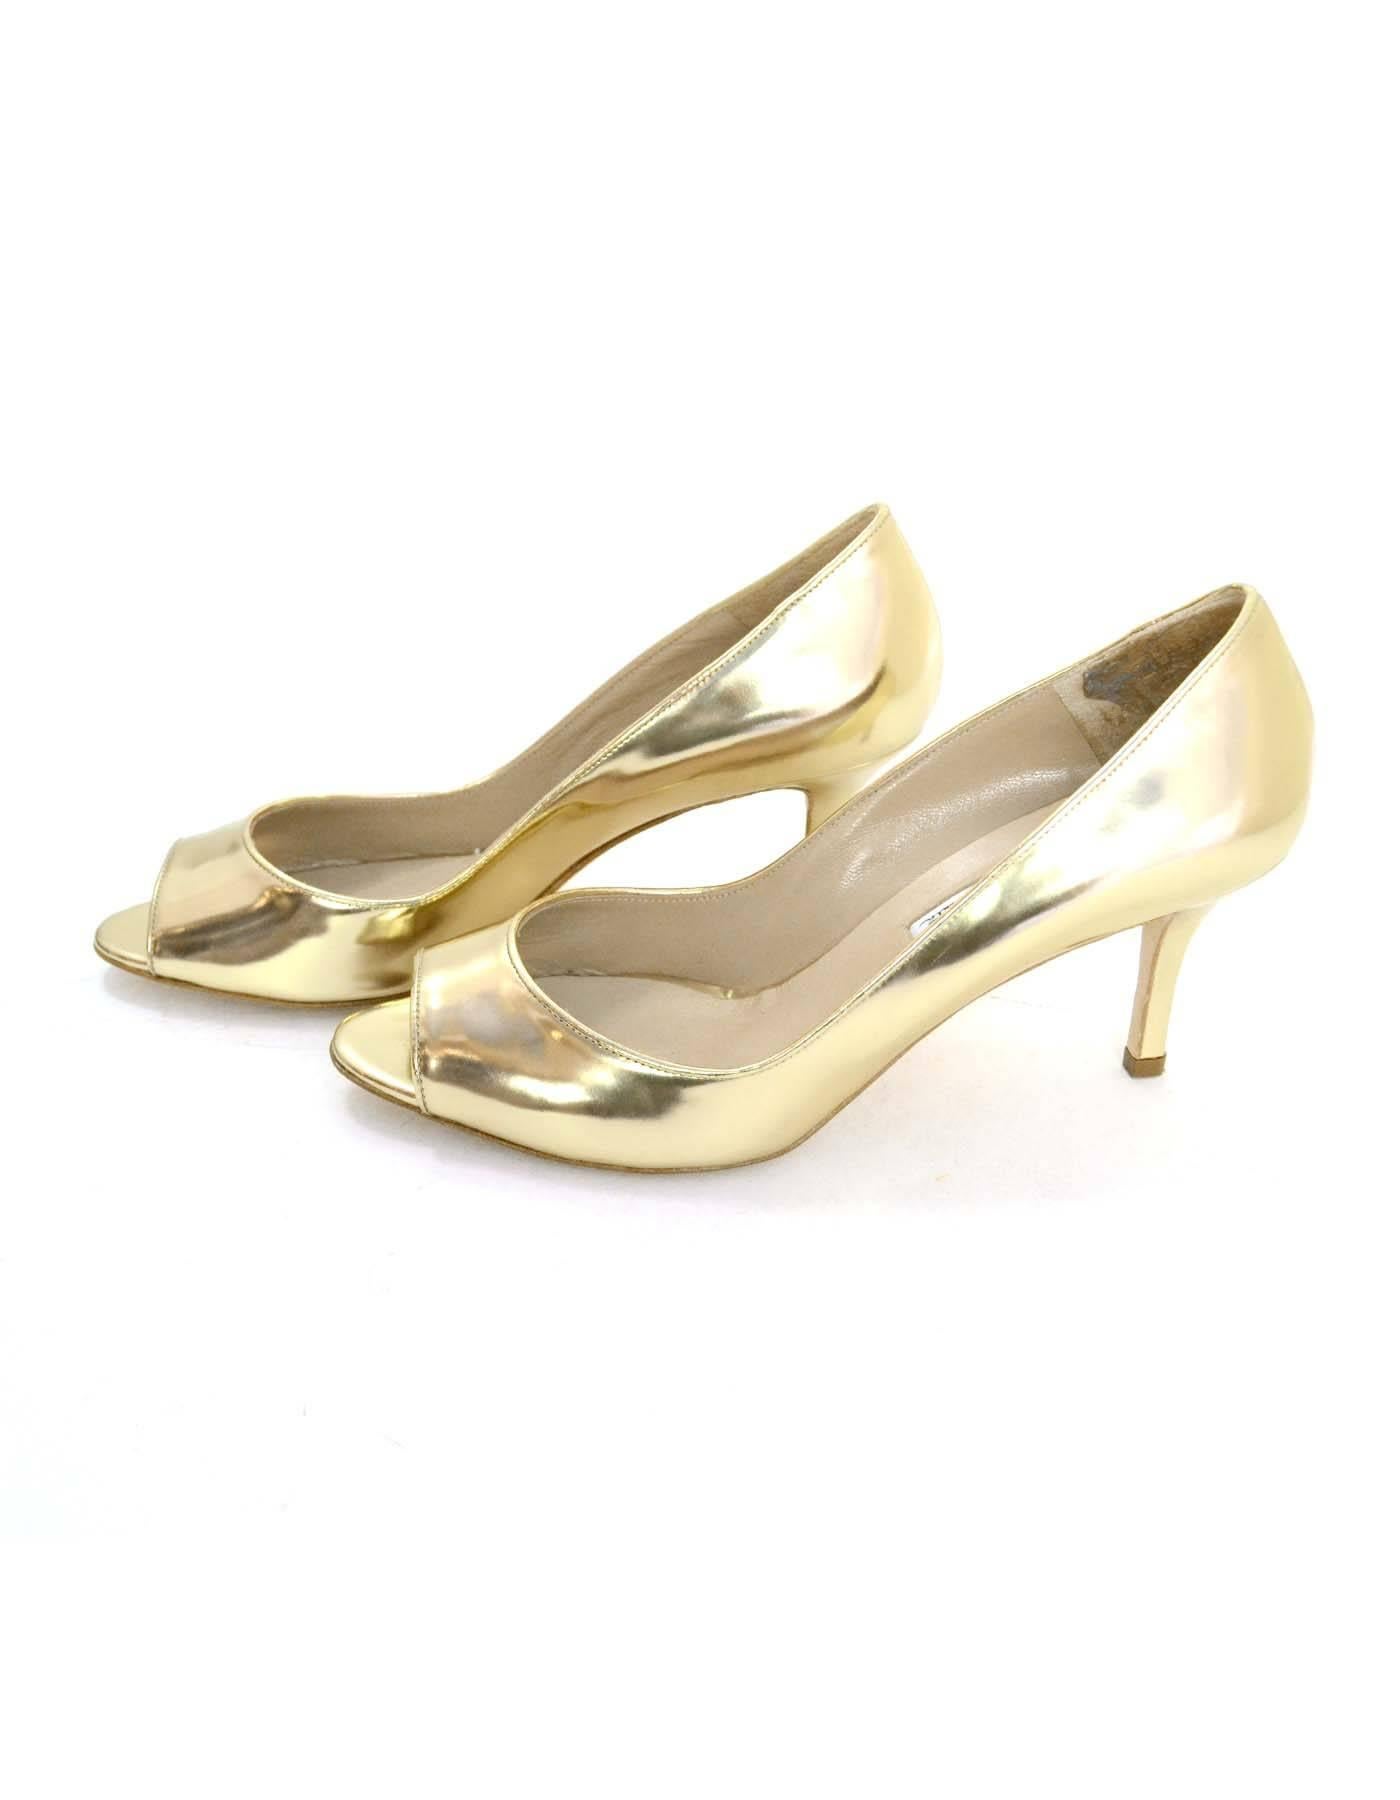 Oscar De La Renta Gold Open Toe Pumps Sz 39.5

Made In: Italy
Color: Gold
Materials: Leather
Closure/Opening: Slide on
Sole Stamp: Oscar de la Renta made in Italy 39.5
Overall Condition: Excellent pre-owned condition with the exception of